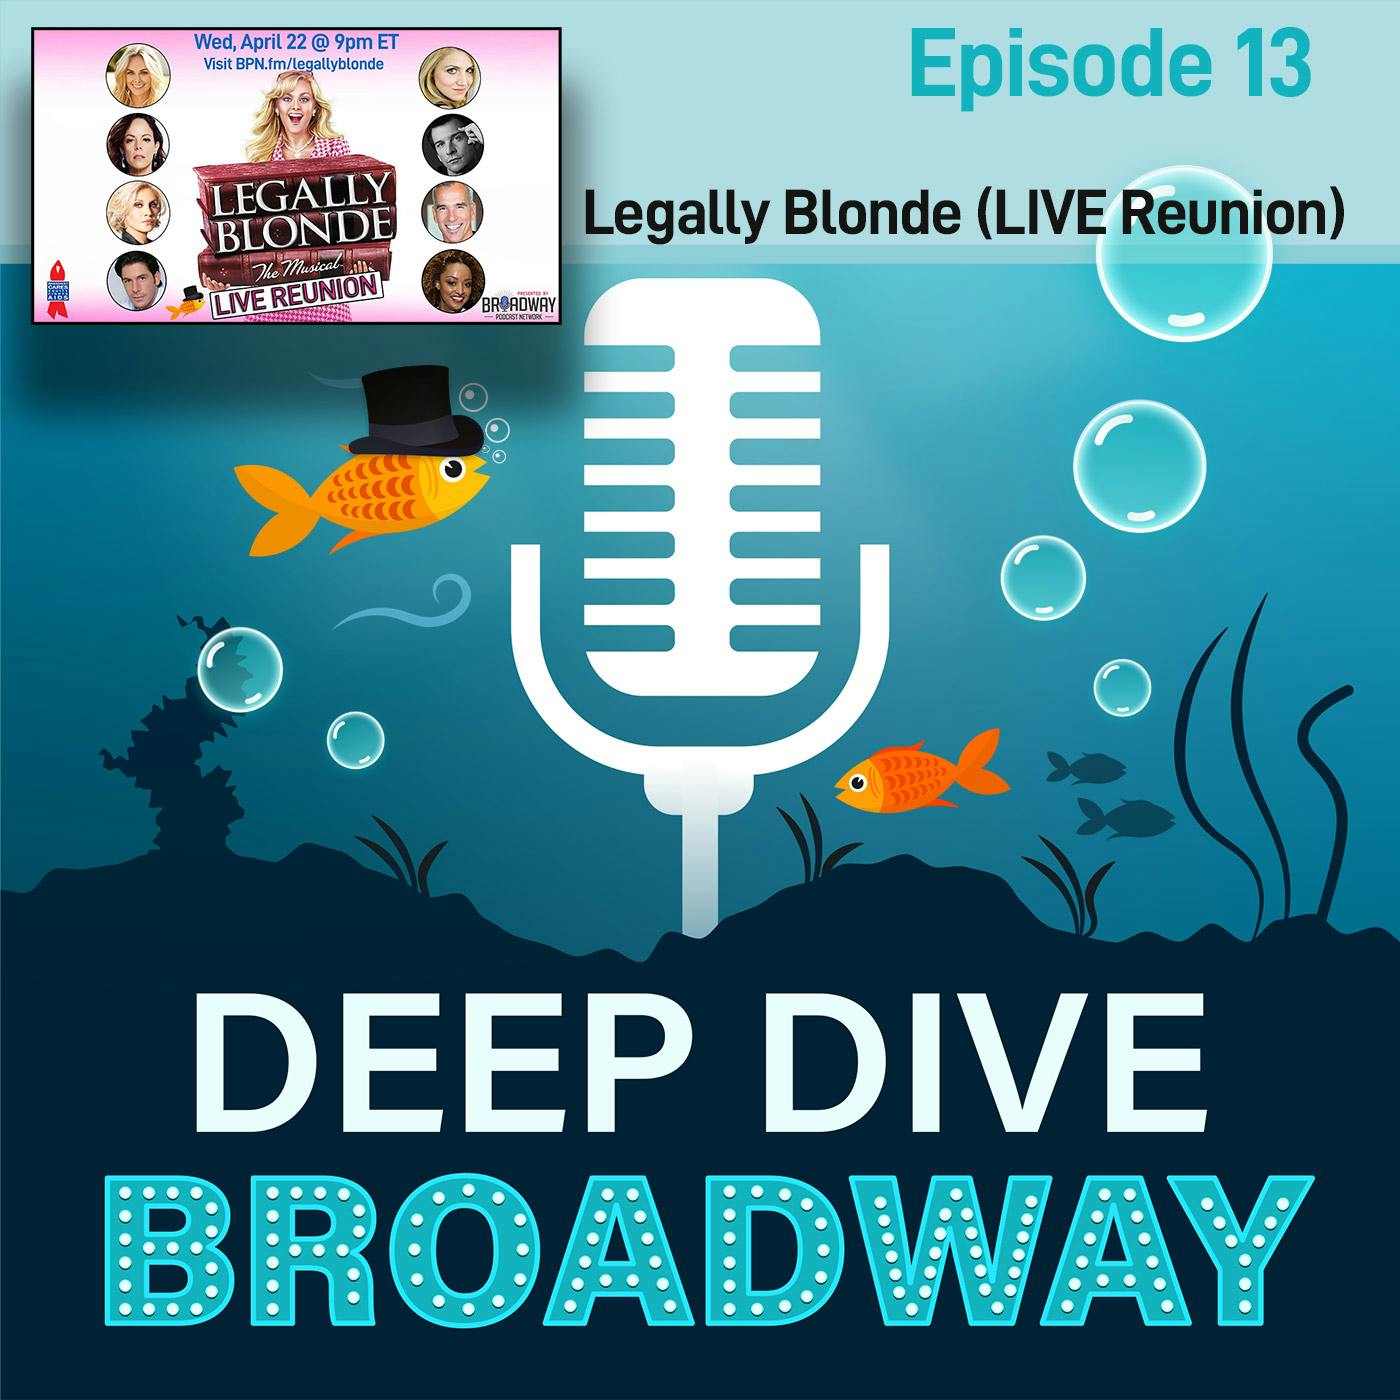 #13 - Legally Blonde cast reunion (Live: BPN Town Hall)